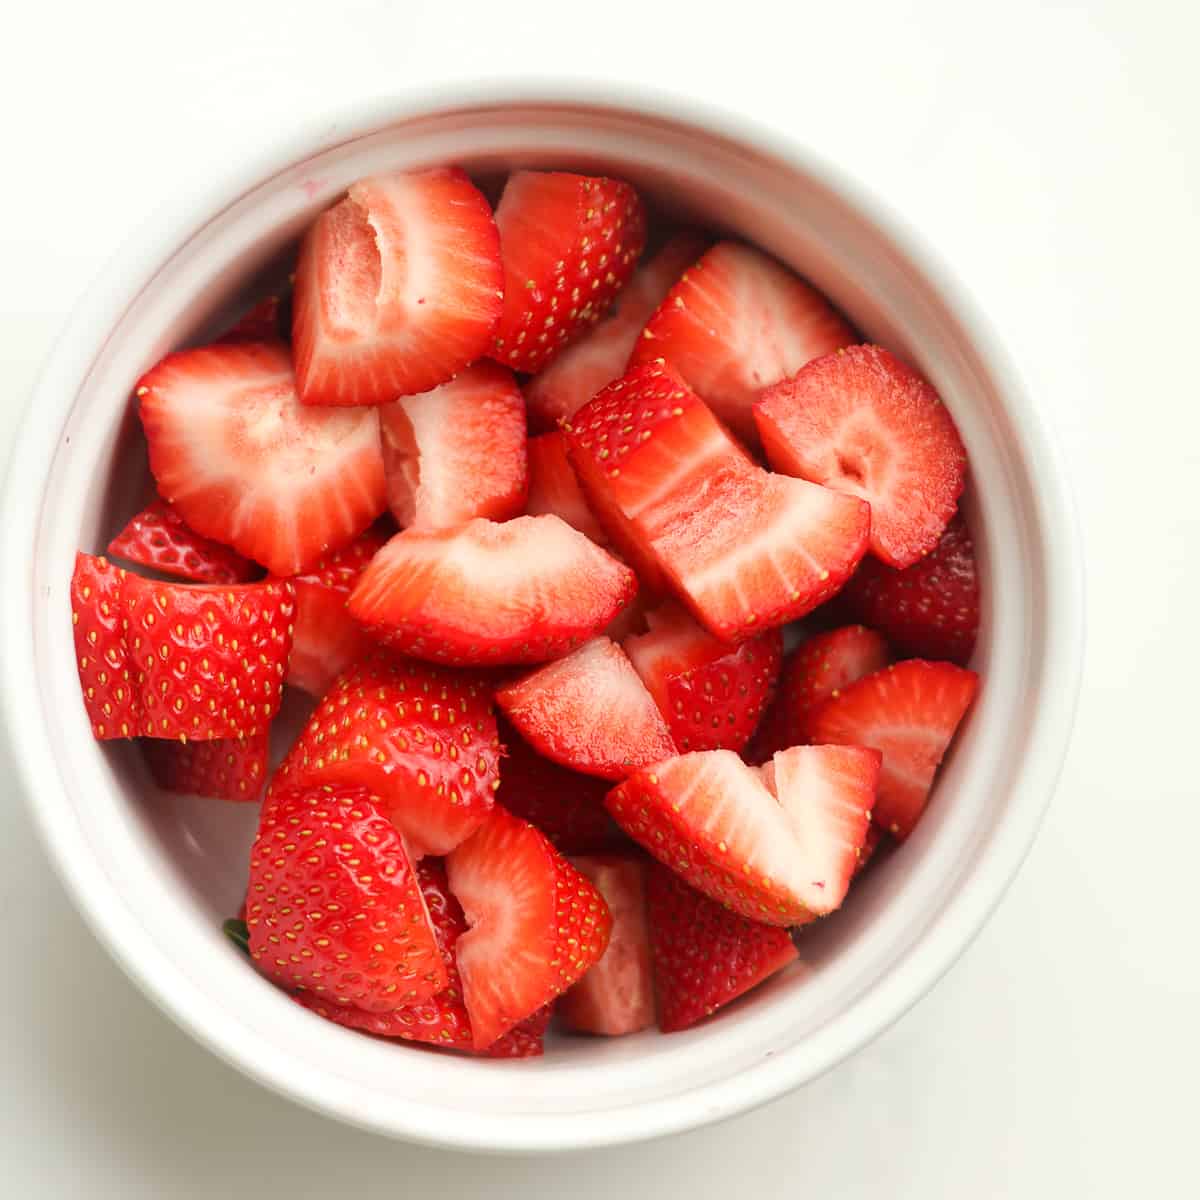 A bowl of sliced strawberries.